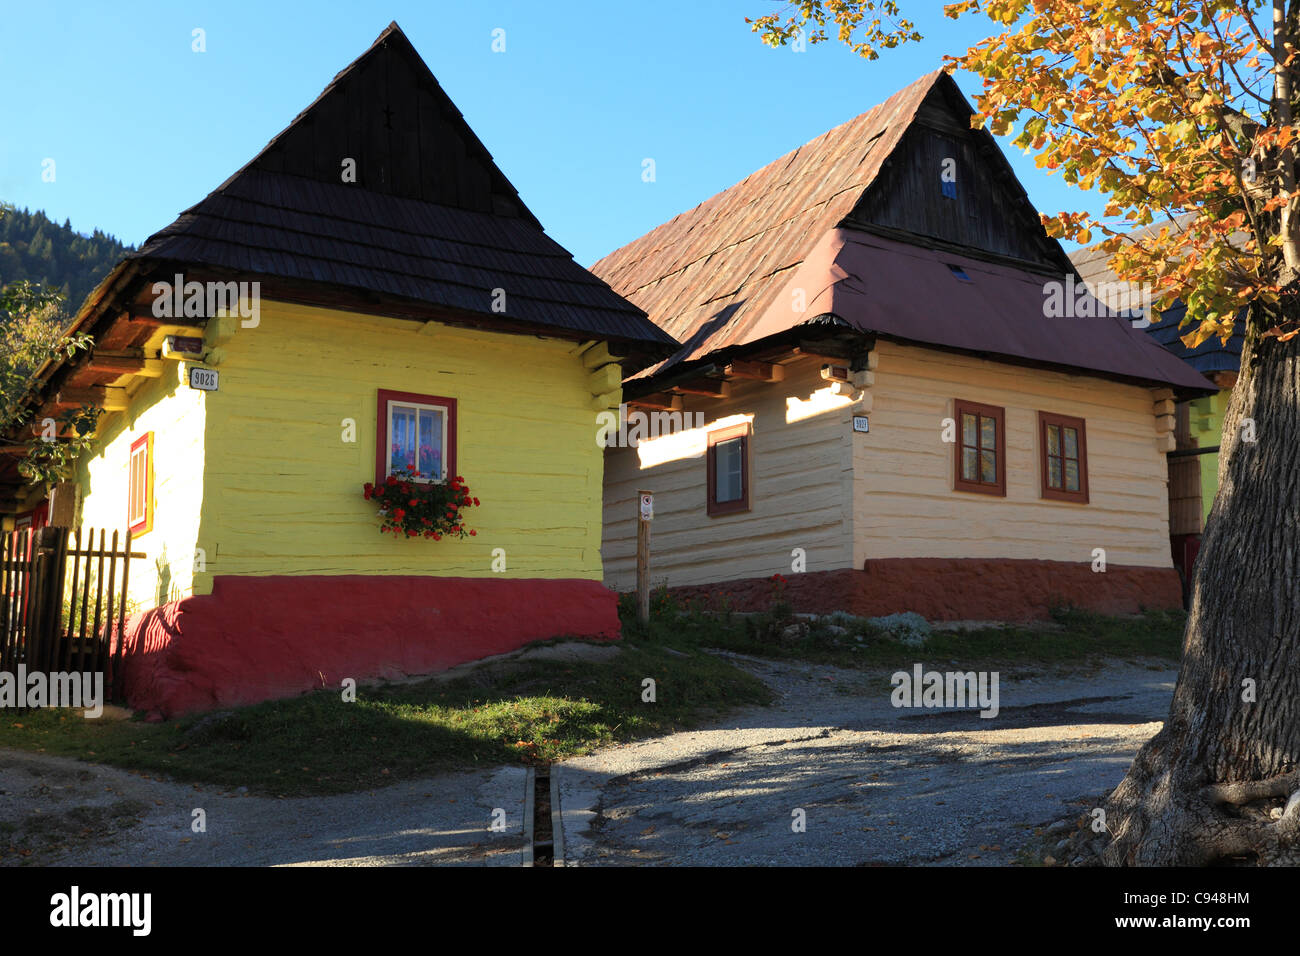 Traditional painted wooden cottages in Vlkolinec, Slovakia. Village is registered on UNESCO World Heritage Site list. Stock Photo